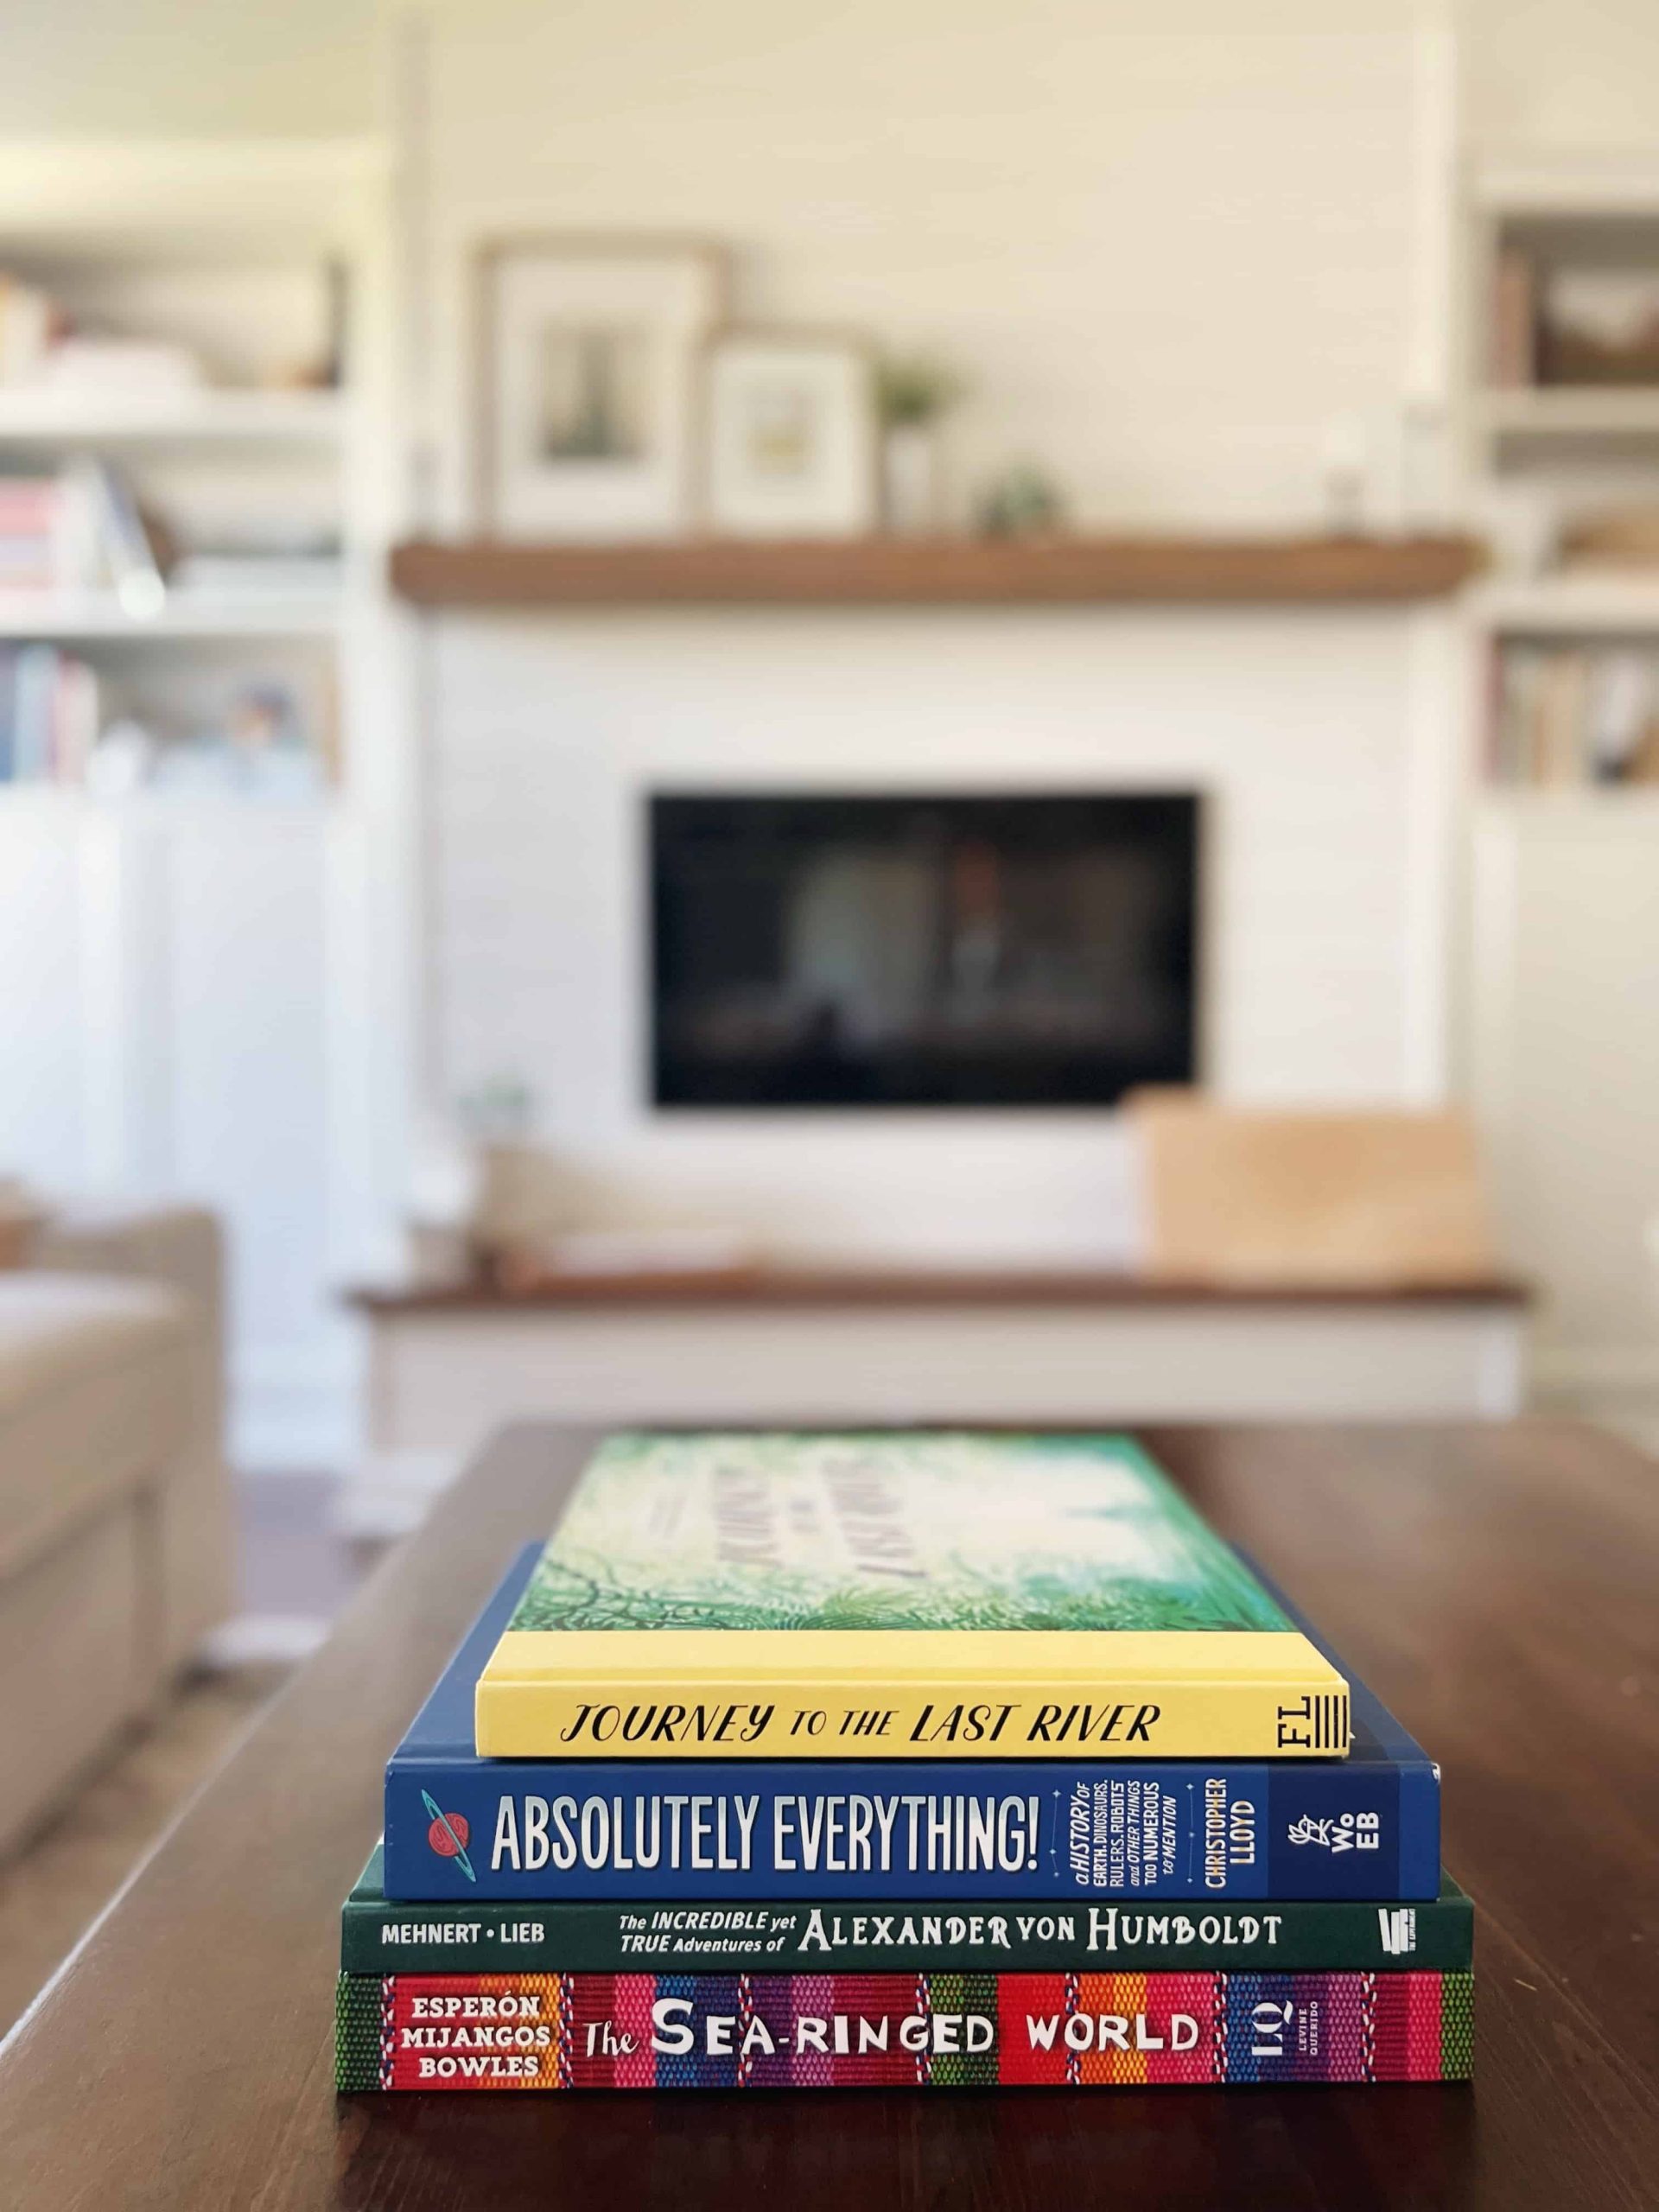 Our homeschool morning basket family read-aloud book selections this semester include Absolutely Everything by Christopher Lloyd, The Incredible Yet True Adventures of Alexander von Humboldt, Journey to the Last River, and The Sea-Ringed World: Sacred Stories of the Americas. 